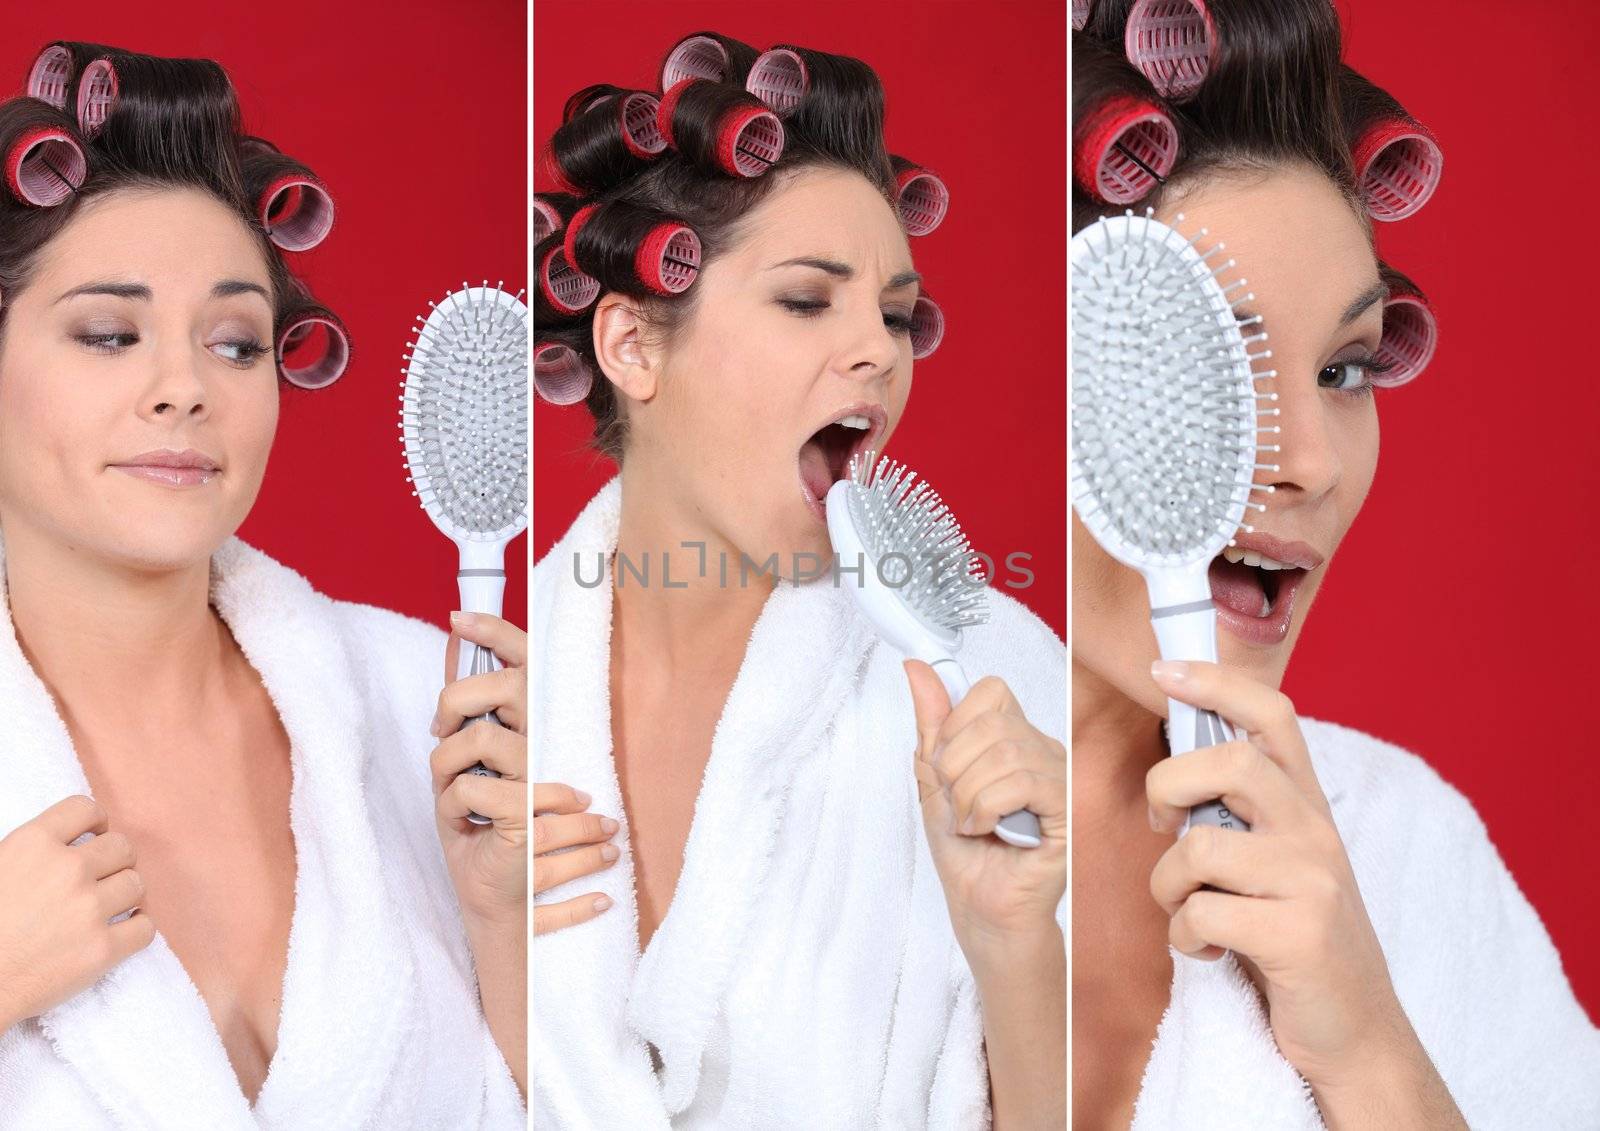 brunette wearing bathrobe with hair curlers holding hairbrush holding against red background